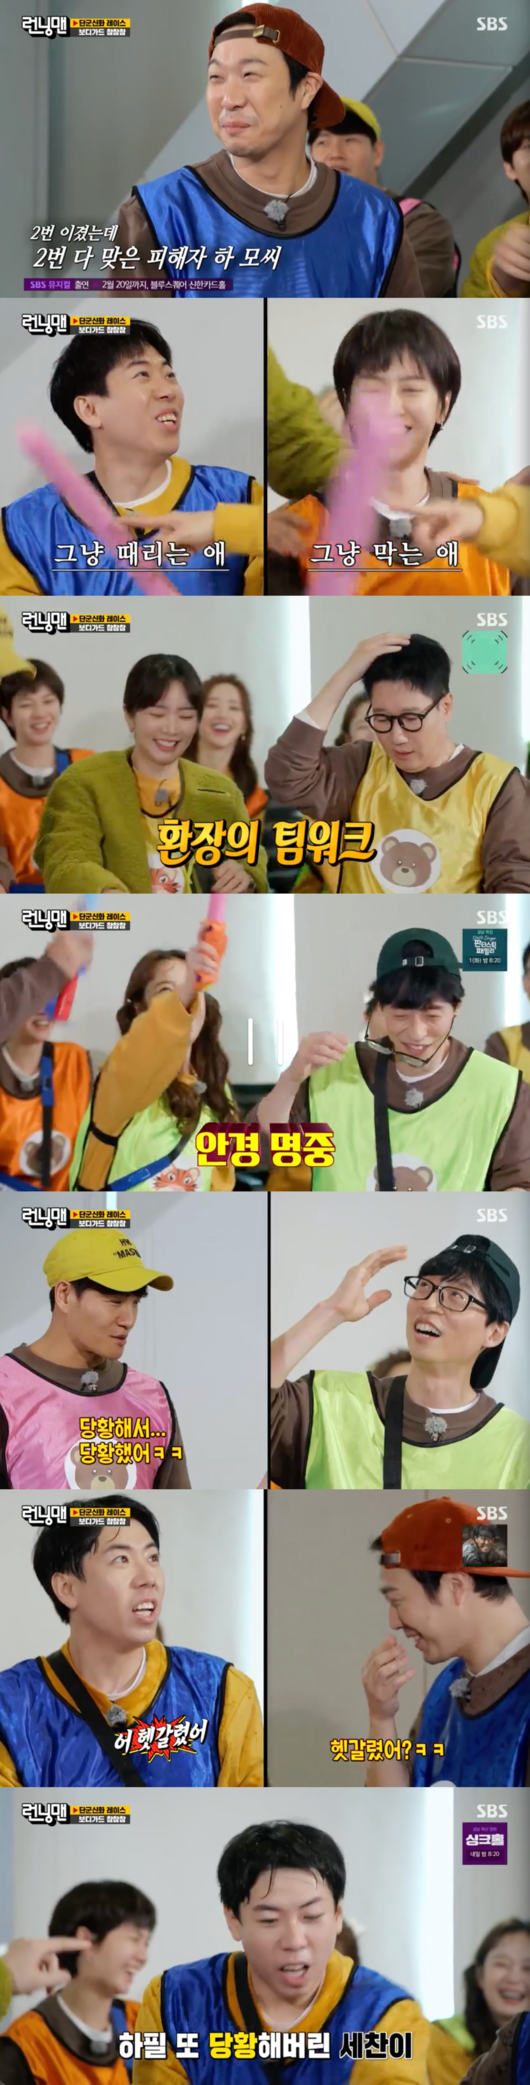 Members of Running Man caused team kilo honey jam.On SBS Running Man, which was broadcast on the afternoon of the 30th, the members teamed up with tiger band guests Super Junior Eunhyuk, Hong Soo-Ah and Bae Seul-Ki to perform the Dangun myth Race.Yoo Jae-Suk - Jeon So-min went up to the minor victory, while Haha - Yang Se-chan vs Song Ji-hyo - Hong Soo-Ah, Kim Jong-kook - Eunhyuk vs Ji Suk-jin - Bae Seul-Ki played the true true true team match.Haha and Hong Soo-Ah were represented by a true confrontation, and bodyguards Yang Se-chan and Song Ji-hyo had to protect their partners or beat their opponents.The weapon was a sponge knife, the shield was a pot lid. Song Ji-hyo blocked it with a pot lid and told him to understand it even if it was hit.I cant do it again. Its my last nose. The Haha-Yang Se-chan team won thanks to the performance of Mung Ji-hyo.Kim Jong-kook - Eunhyuk vs Ji Suk-jin - Bae Seul-Ki then faced off.Kim Jong-kook hit opponent Ji Suk-jin with fantastic speedJi Suk-jin told Bae Seul-Ki to do a bit well but it was not enough to beat Kim Jong-kook; so was Yoo Jae-Suk.He shouted the glasses are peeled off at Kim Jong-kooks attack and expressed displeasure.So he timidly avenged, attacking Kim Jong-kooks crown, not Eunhyuk.There were plenty of excuses for panicking and attacking each other and the final of Kim Jong-kook - Eunhyuk vs Haha - Yang Se-chan started; the weapon was turned into a water cup.However, Haha attacked Yang Se-chan instead of his opponent, Eunhyuk, and Yang Se-chan was hit by a flood even though he won the match.During Hahas attack, Yang Se-chan poured water on Haha instead of defense, and at this time he was embarrassed and there was a team kill excuse.In the end, Kim Jong-kook, Yoo Jae-Suk, Yang Se-chan, and Haha were able to eat each other and make the audience feel like they were tired.On the other hand, poachers among the bear members in the race became Ji Suk-jin, and poachers among the tiger members became Eunhyuk.Eunhyuk met his partner well and played a big role in the game, winning more than 50 garlic and winning the final place.On the other hand, Kim Jong-kook, his first partner, misunderstood Haha as a bear poacher, even though he knew the identity of Eunhyuk early.running man